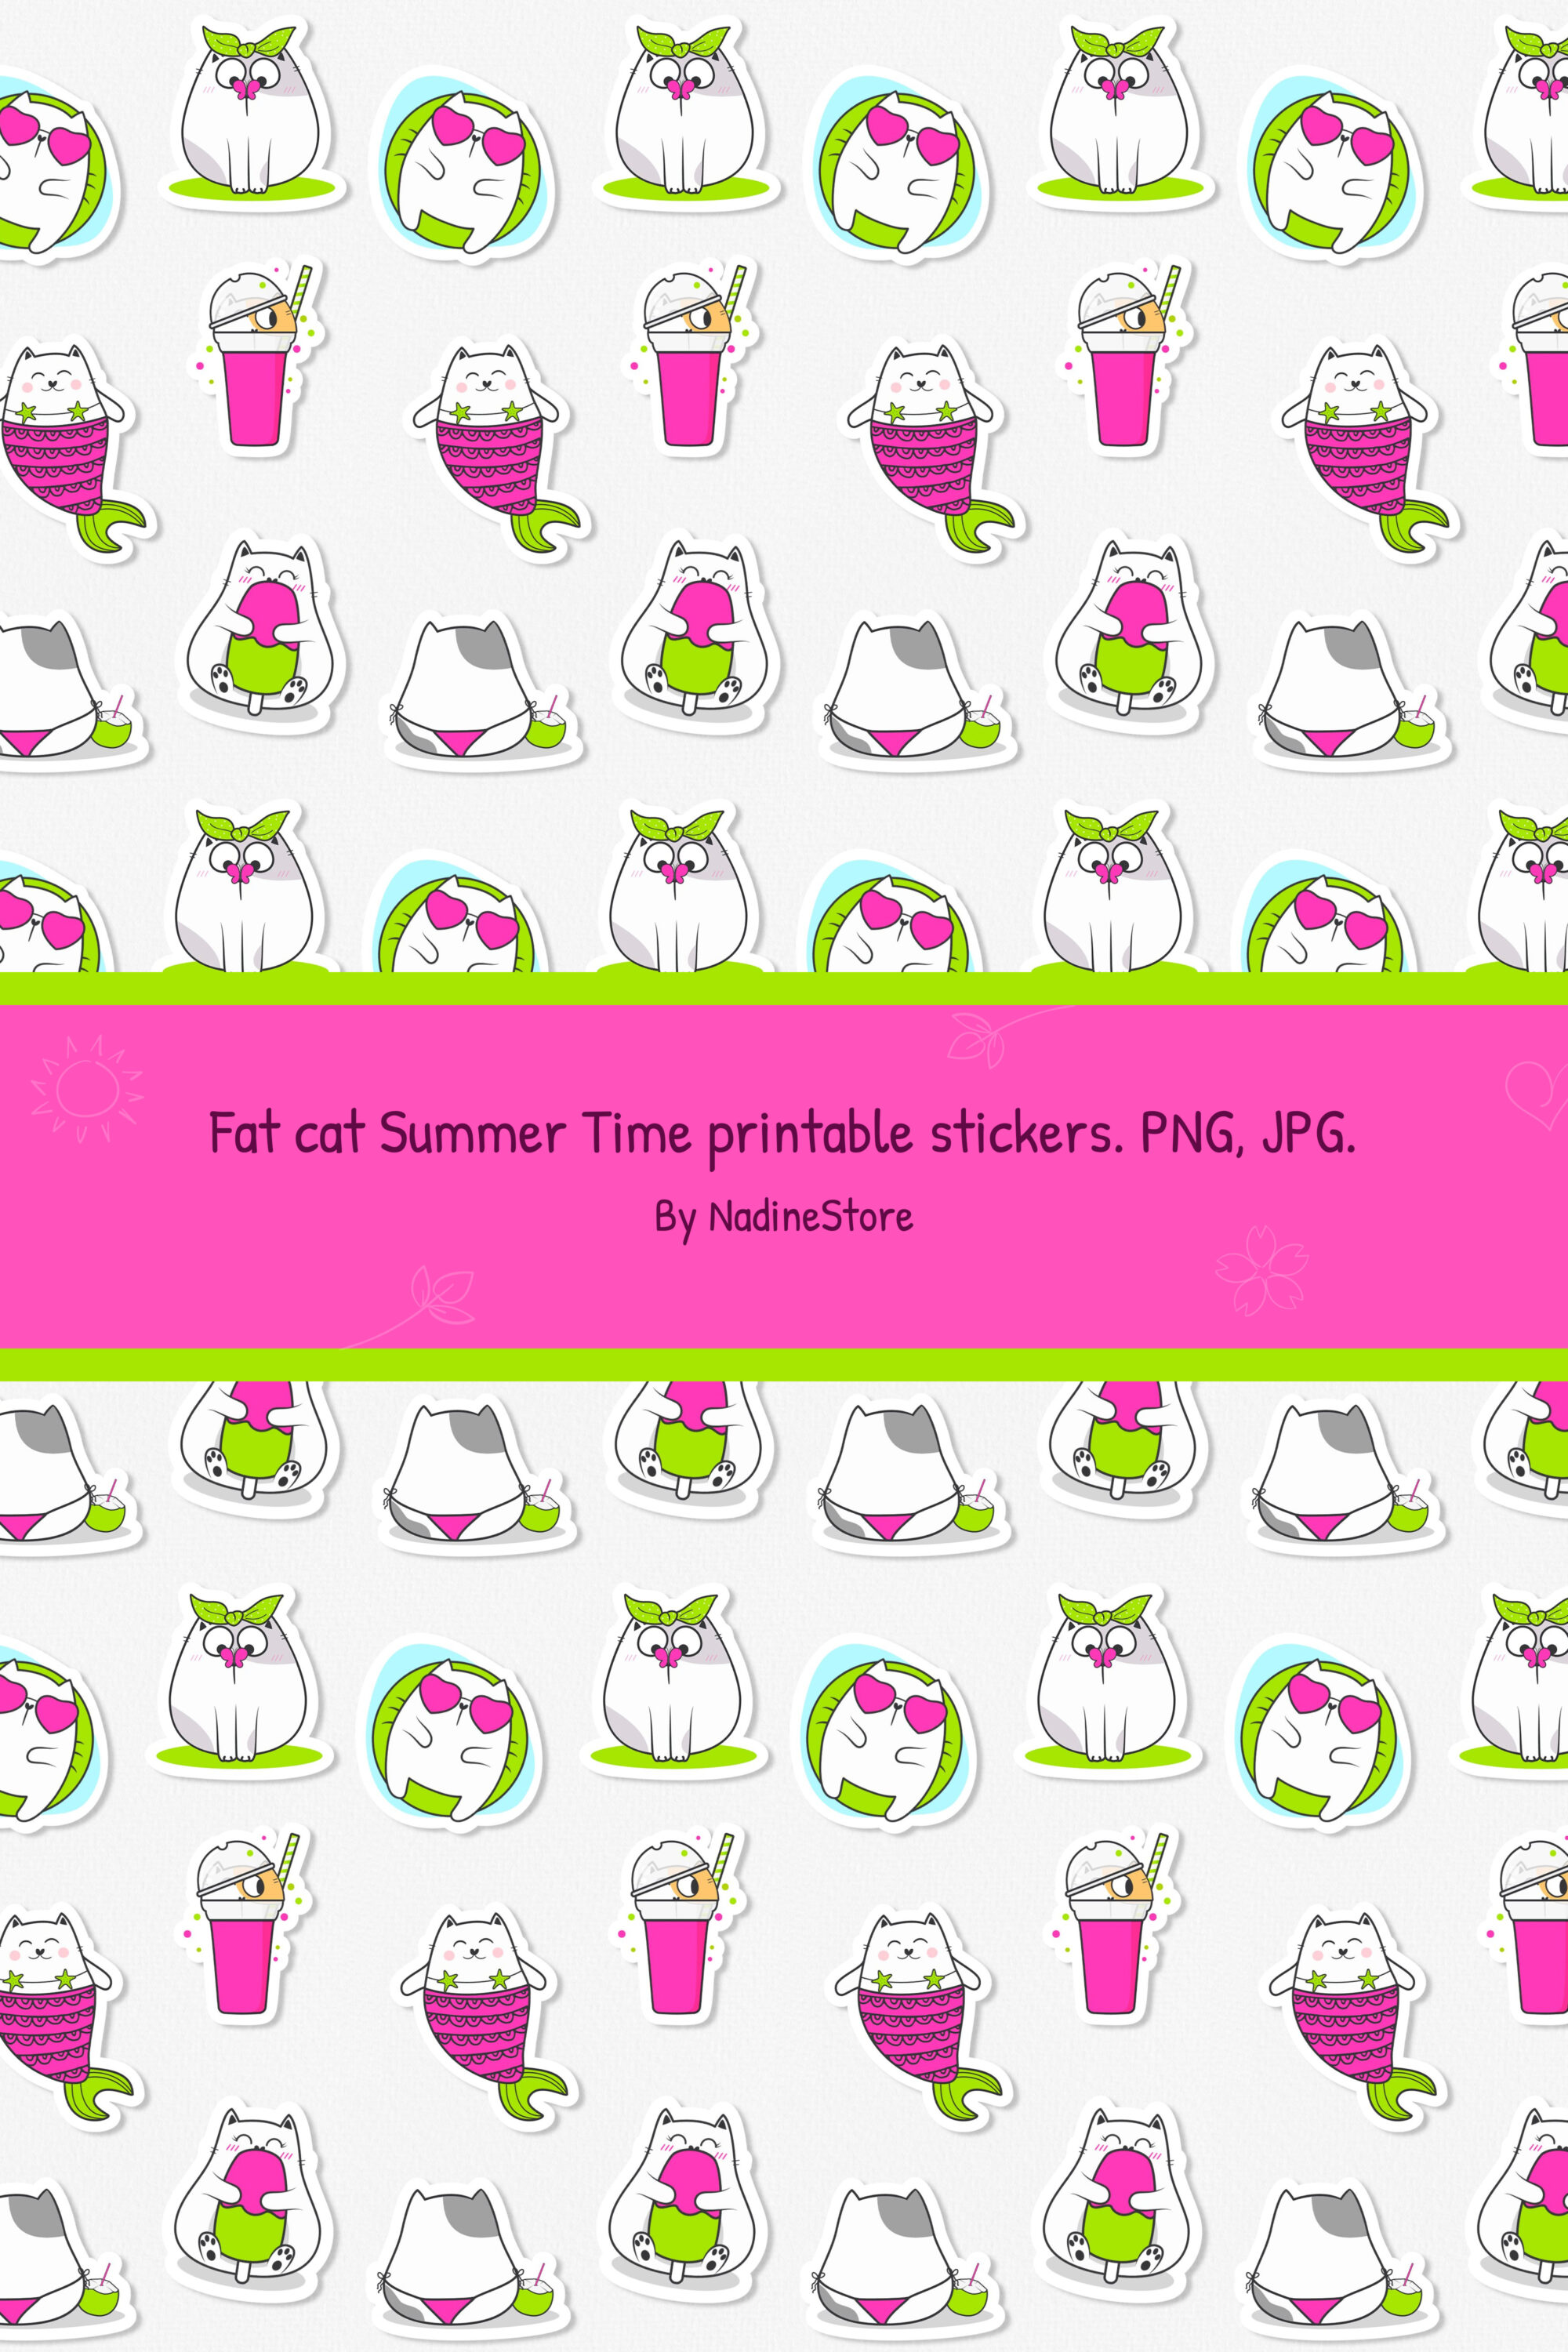 Fat cat summer time printable stickers of pinterest.